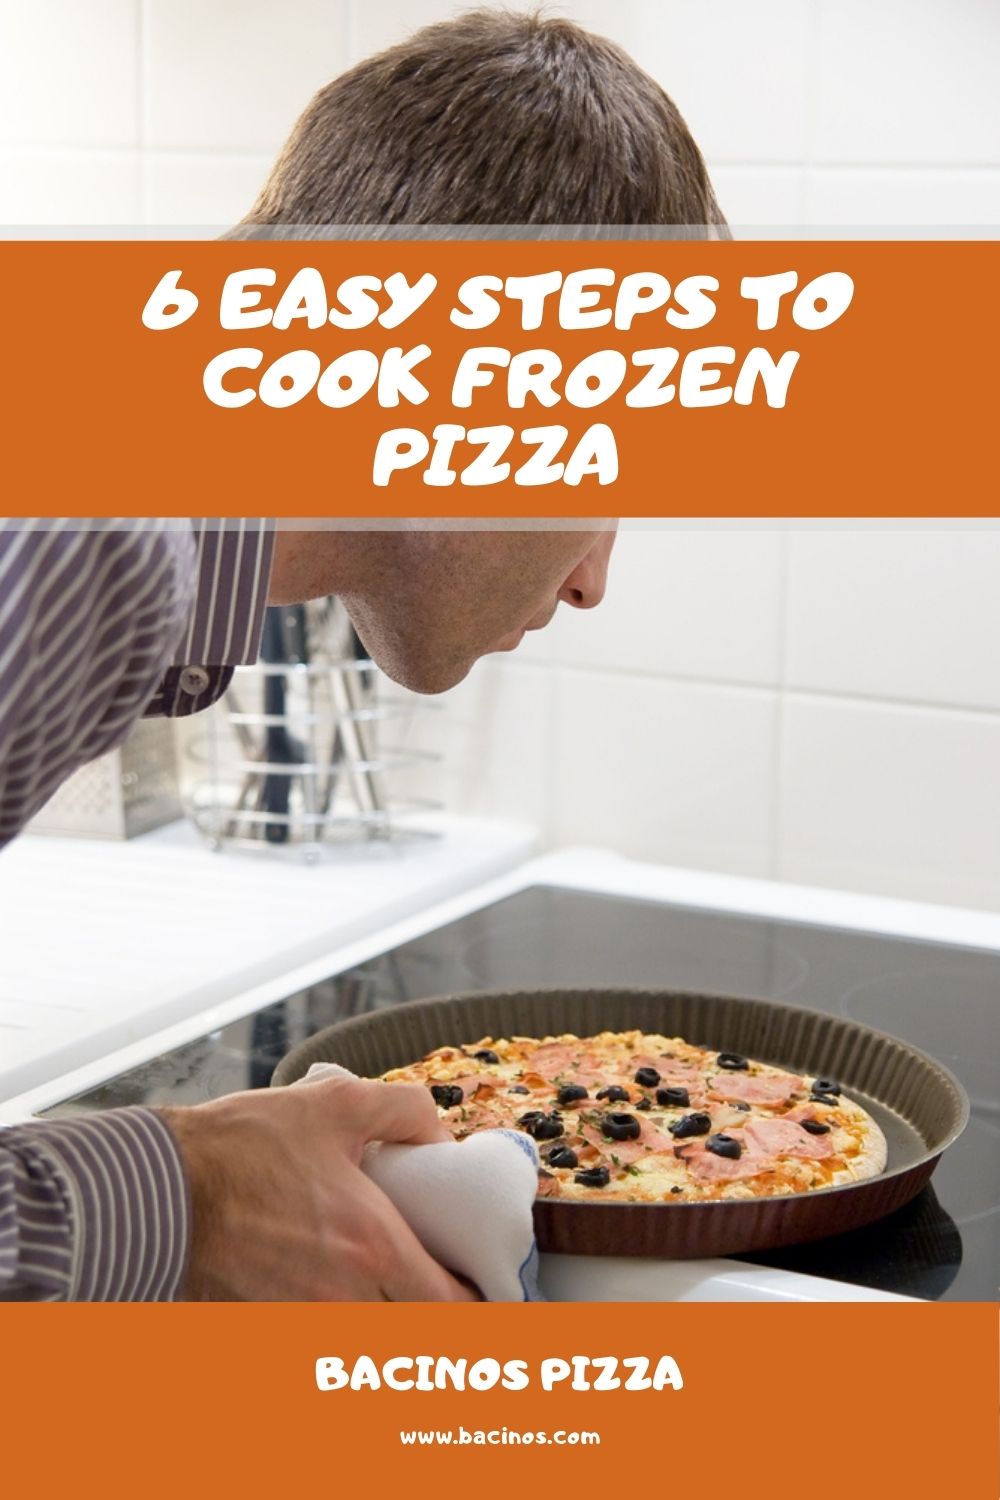 6 Easy Steps to Cook Frozen Pizza